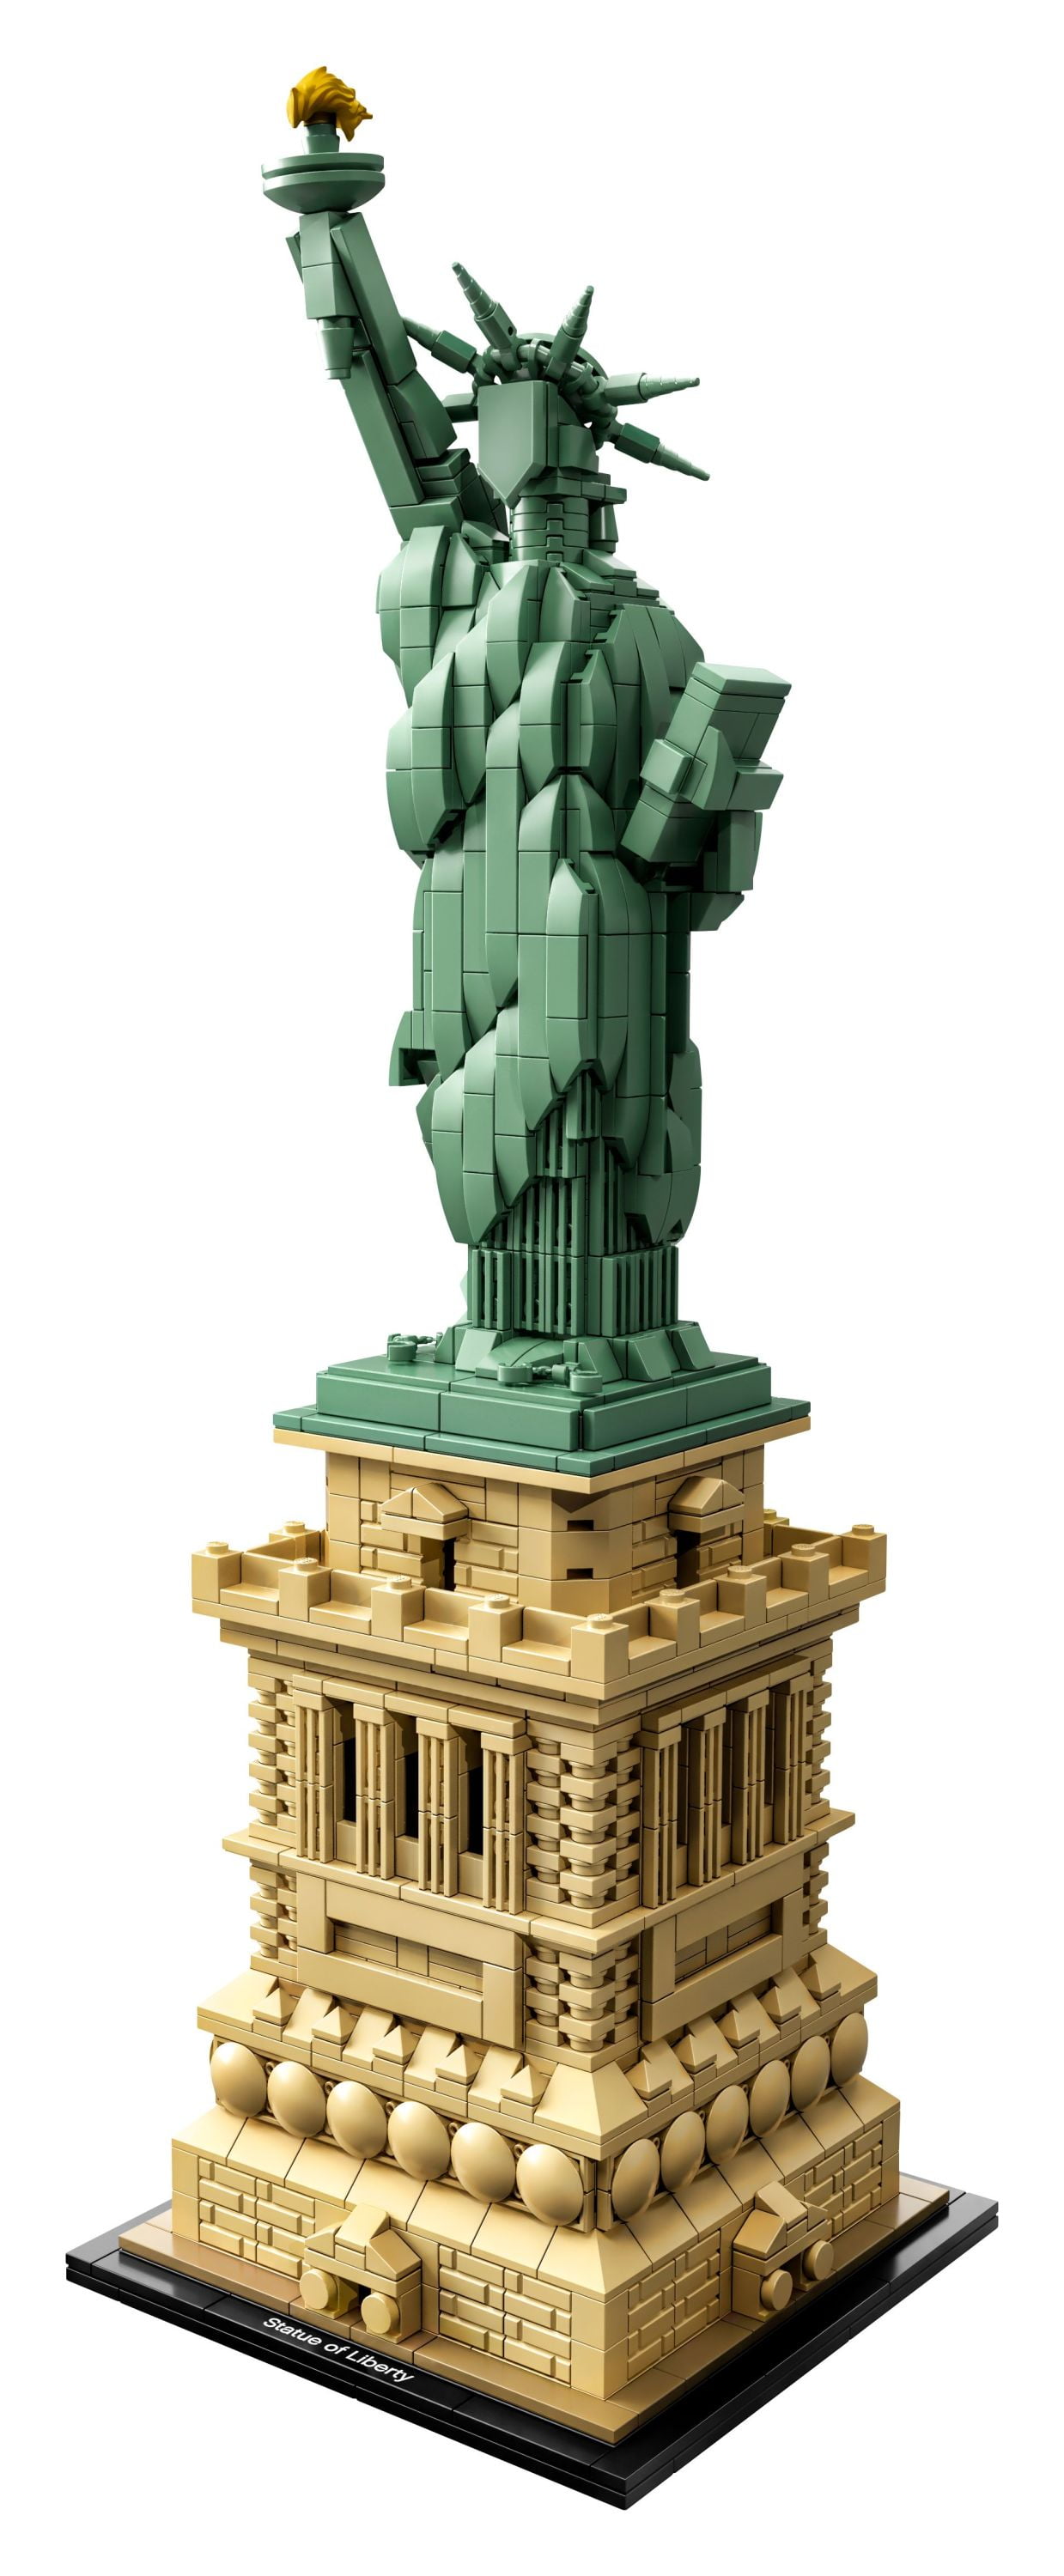 LEGO Architecture Statue of Liberty 21042 Model - Collectible New York City Souvenir, Creative Home Décor or Office Centerpiece, Great Gift Idea for Adults Teens - Walmart.com